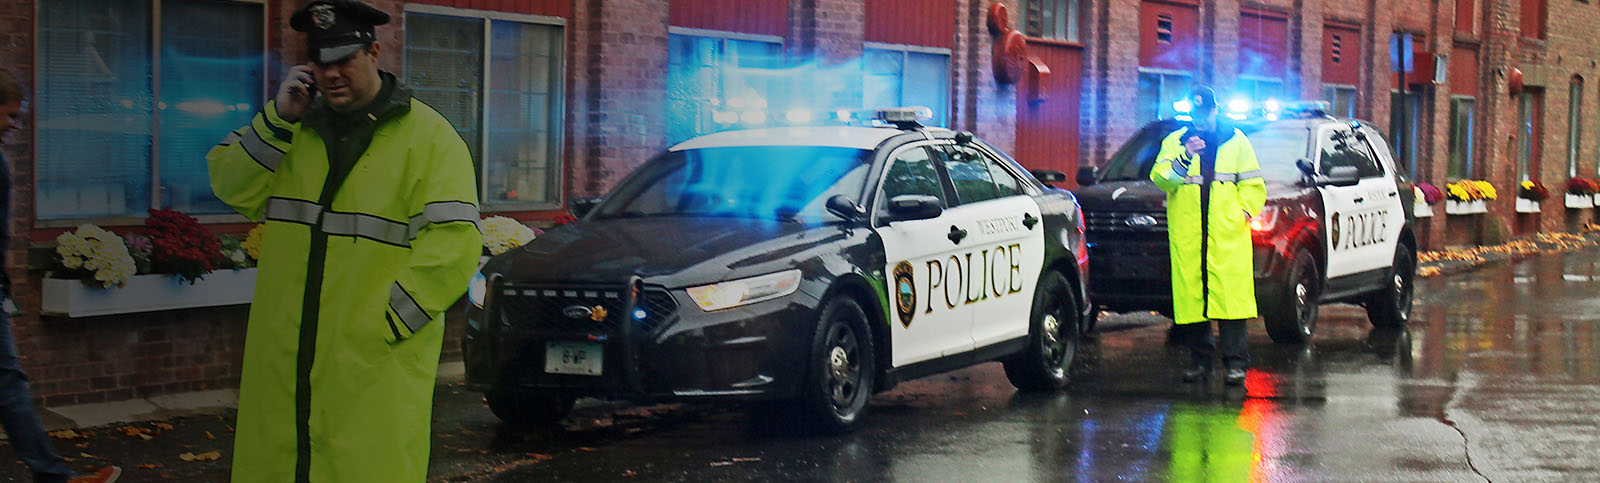 Police officers standing in the rain in bright yellow reflective rain coats and police hats standing in front of two police cars with lights on, one using a cell phone while the other appears to look at phone screen  